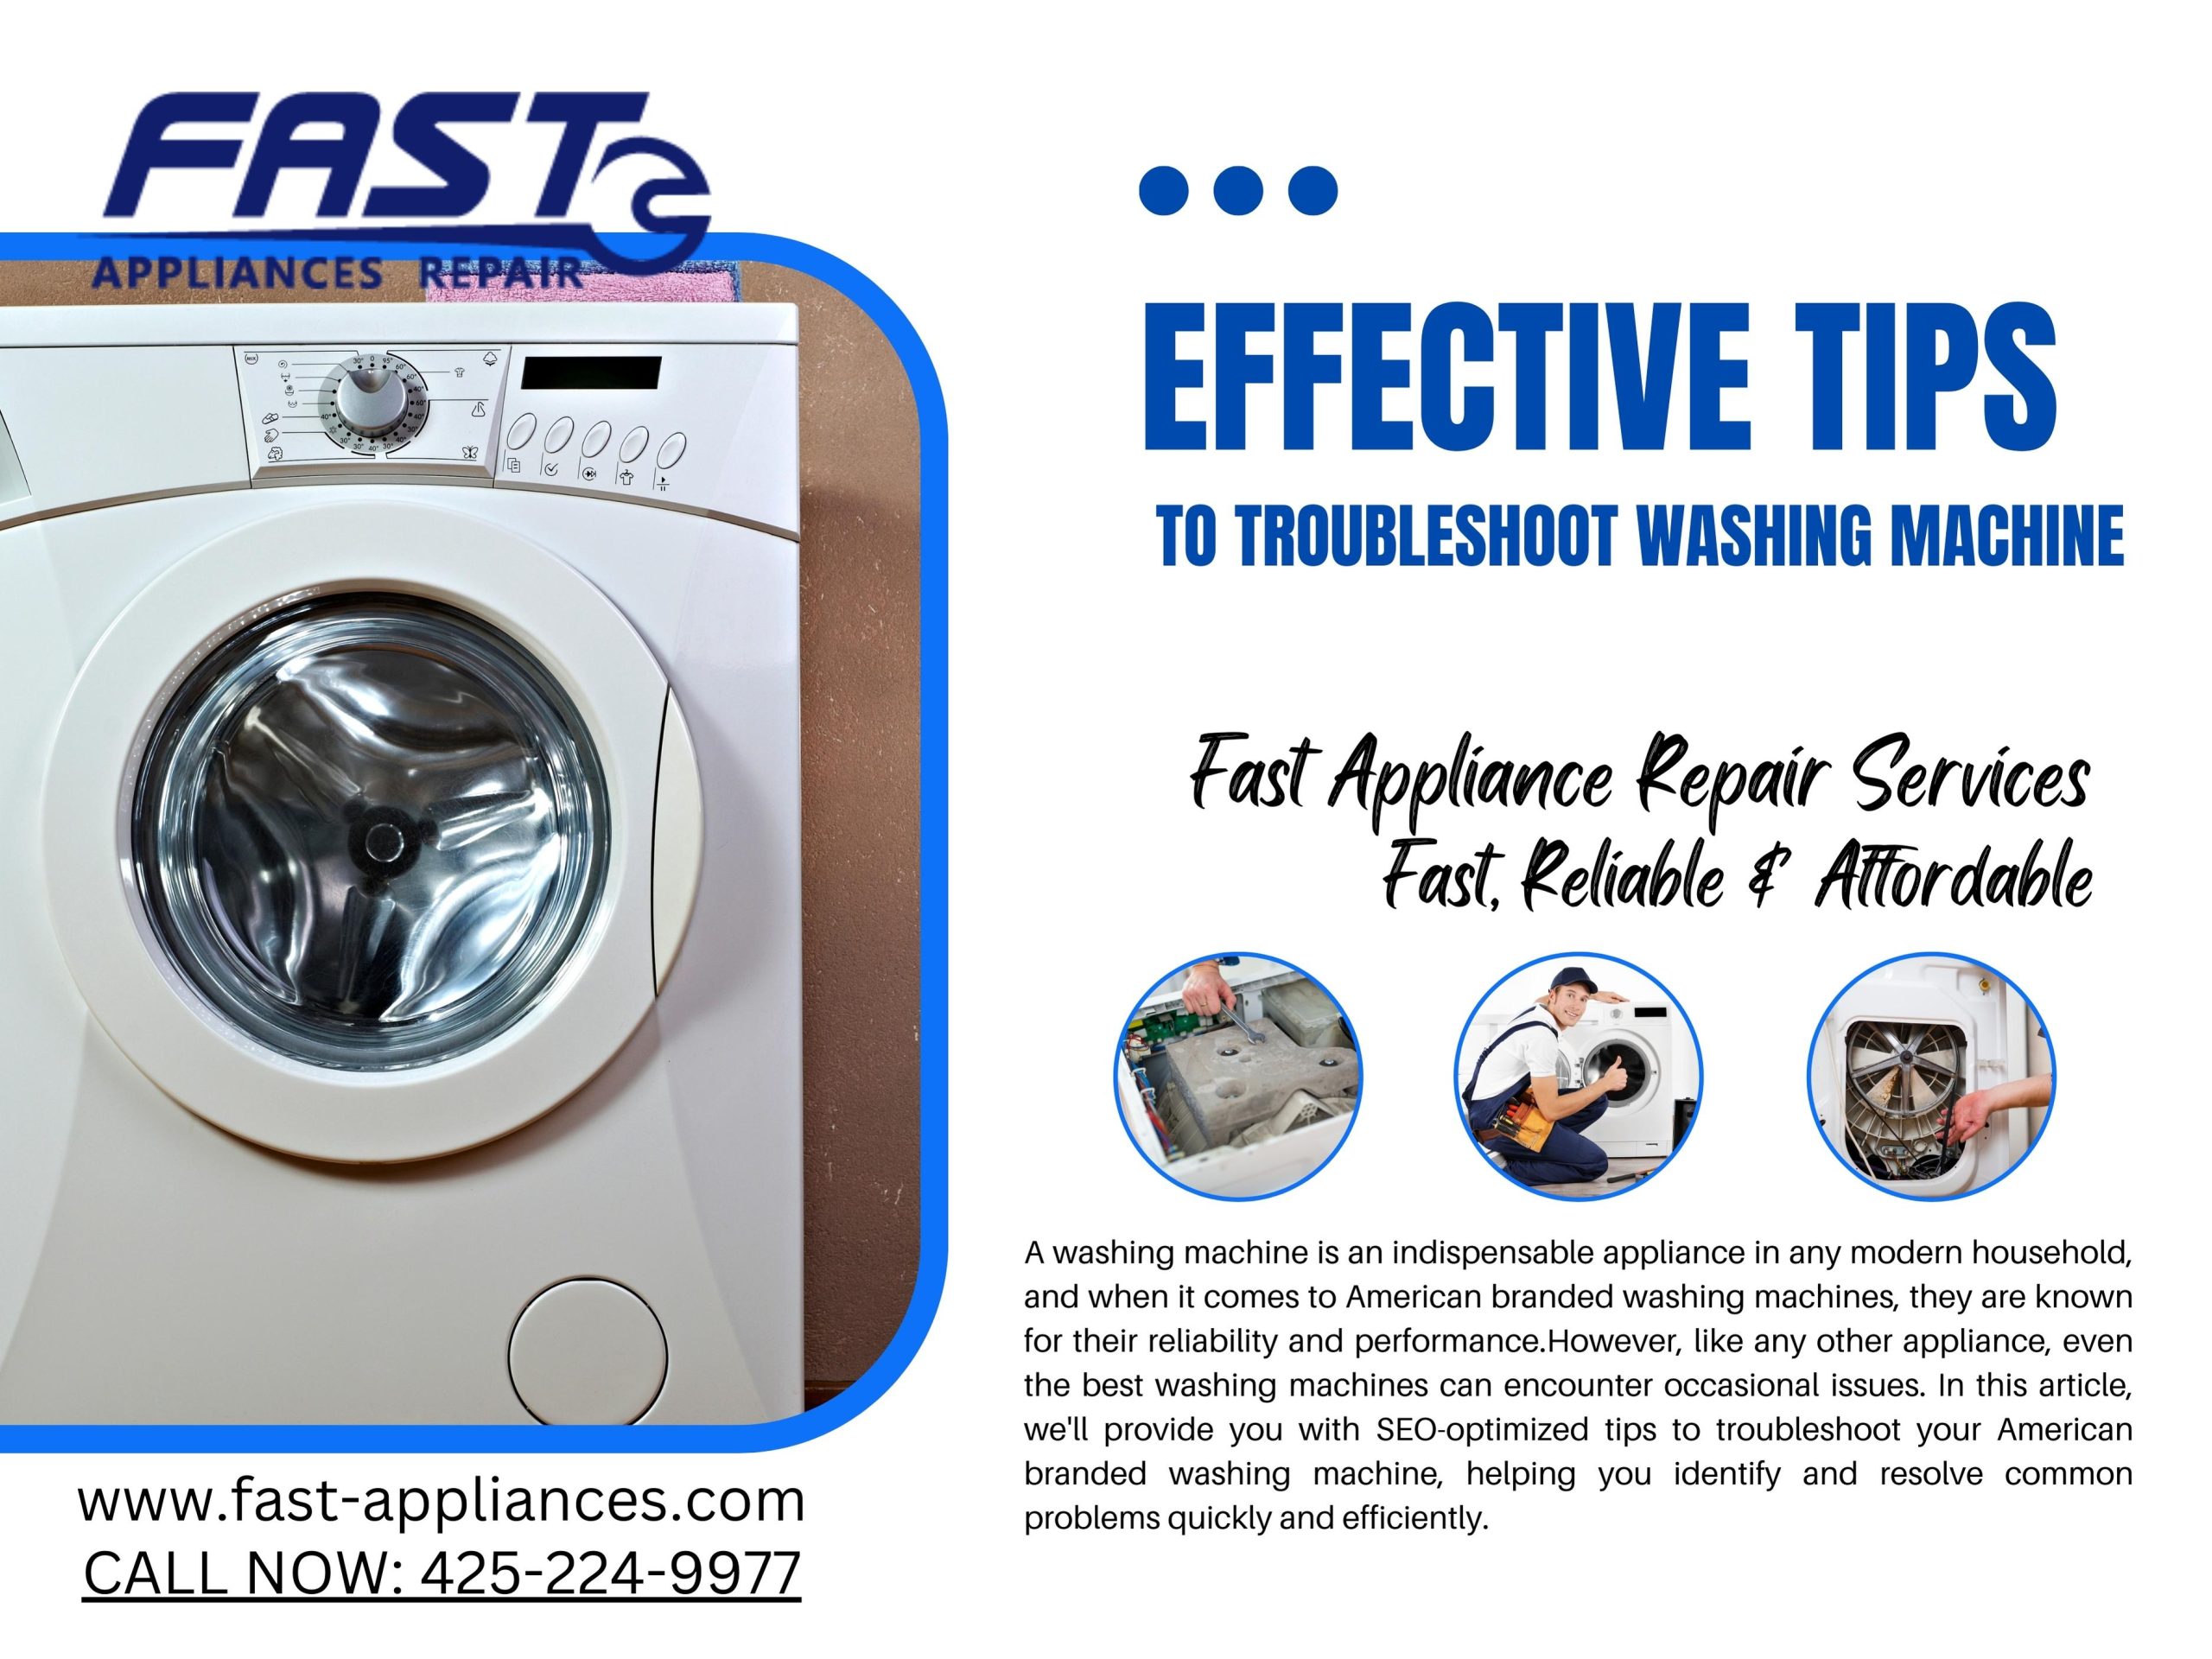 10 Effective Tips to Troubleshoot Your American Branded Washing Machine